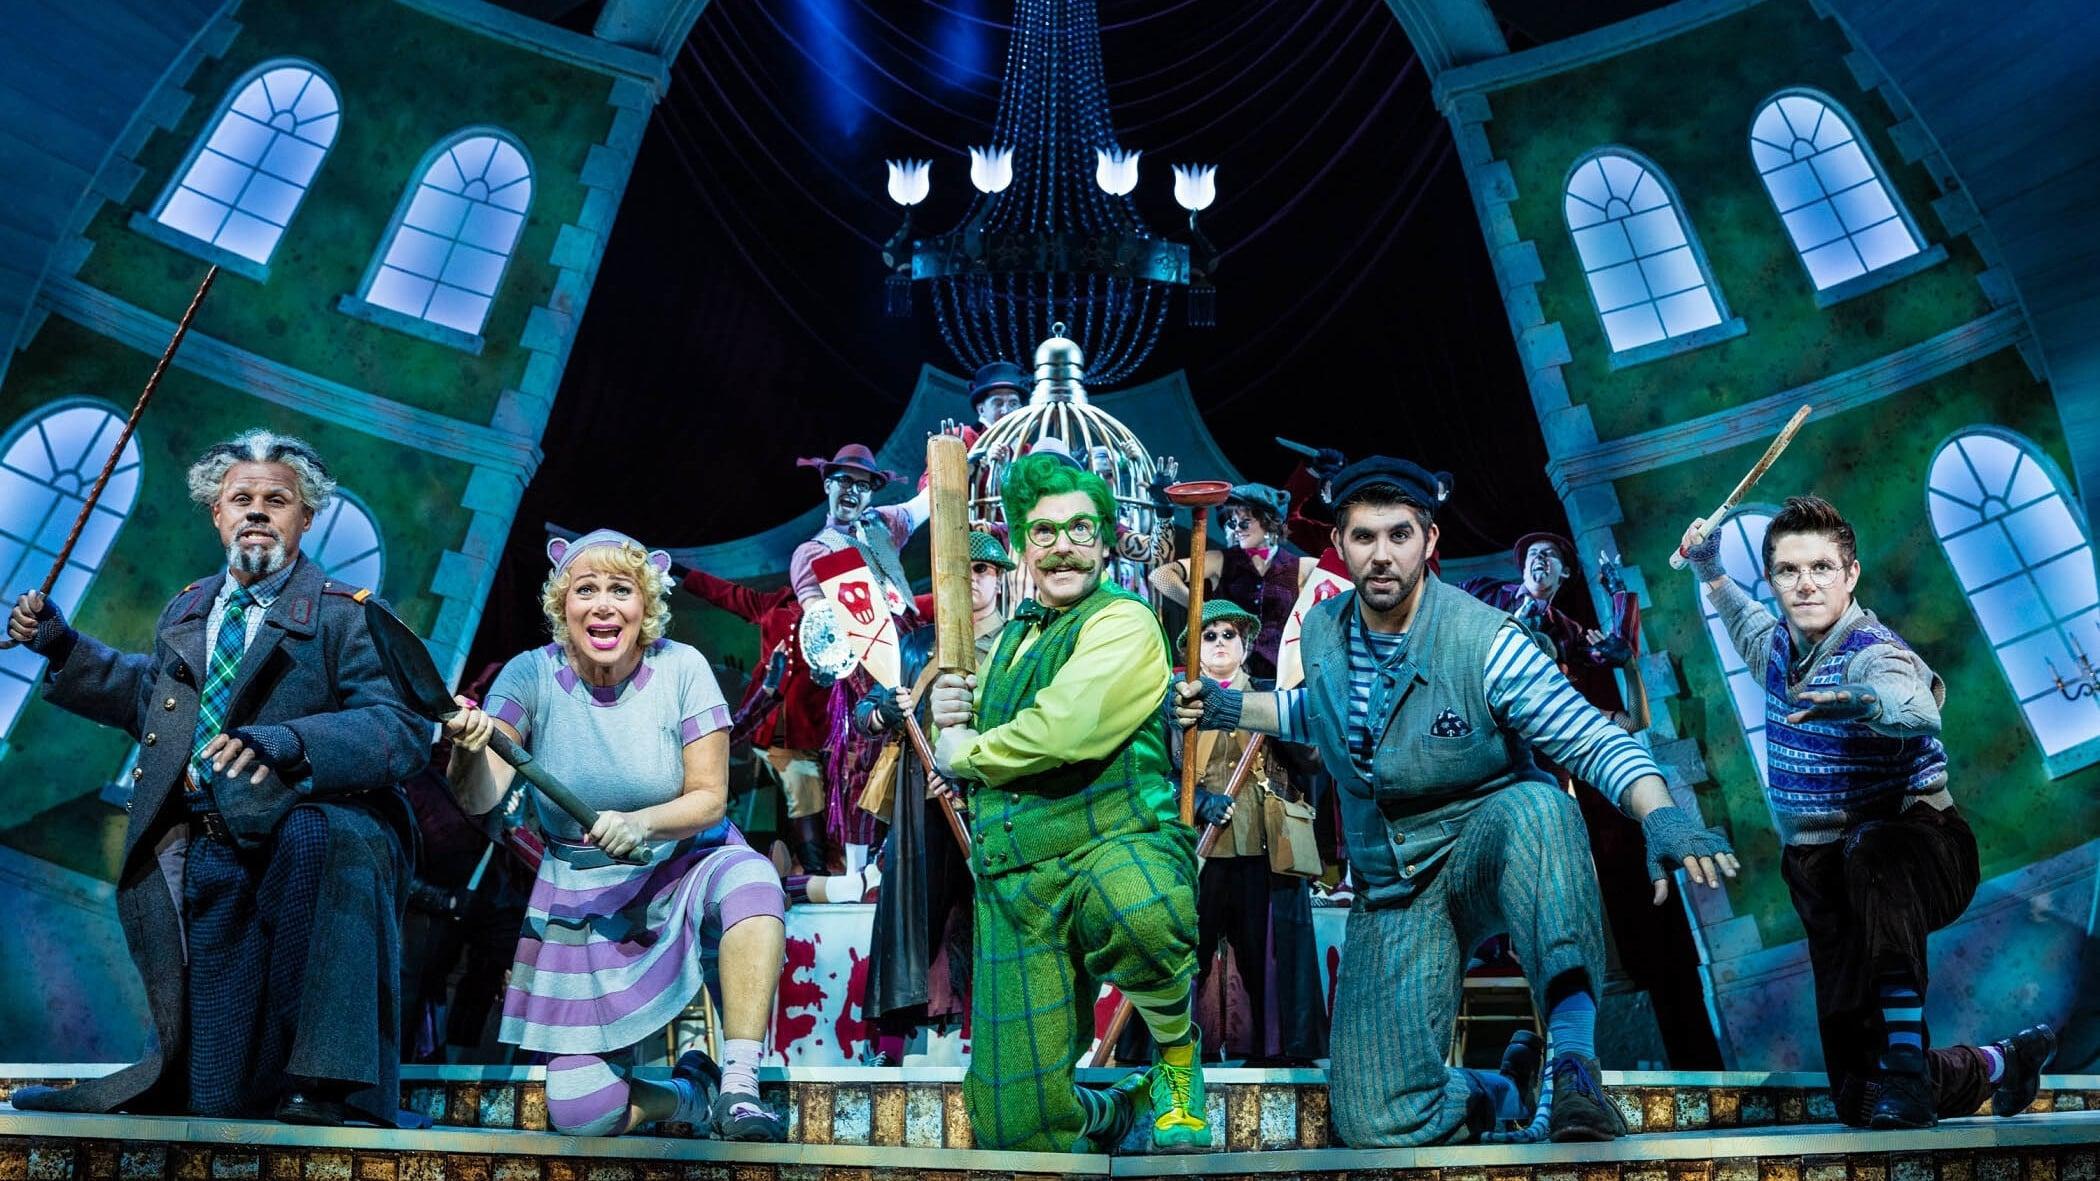 The Wind in the Willows: The Musical backdrop